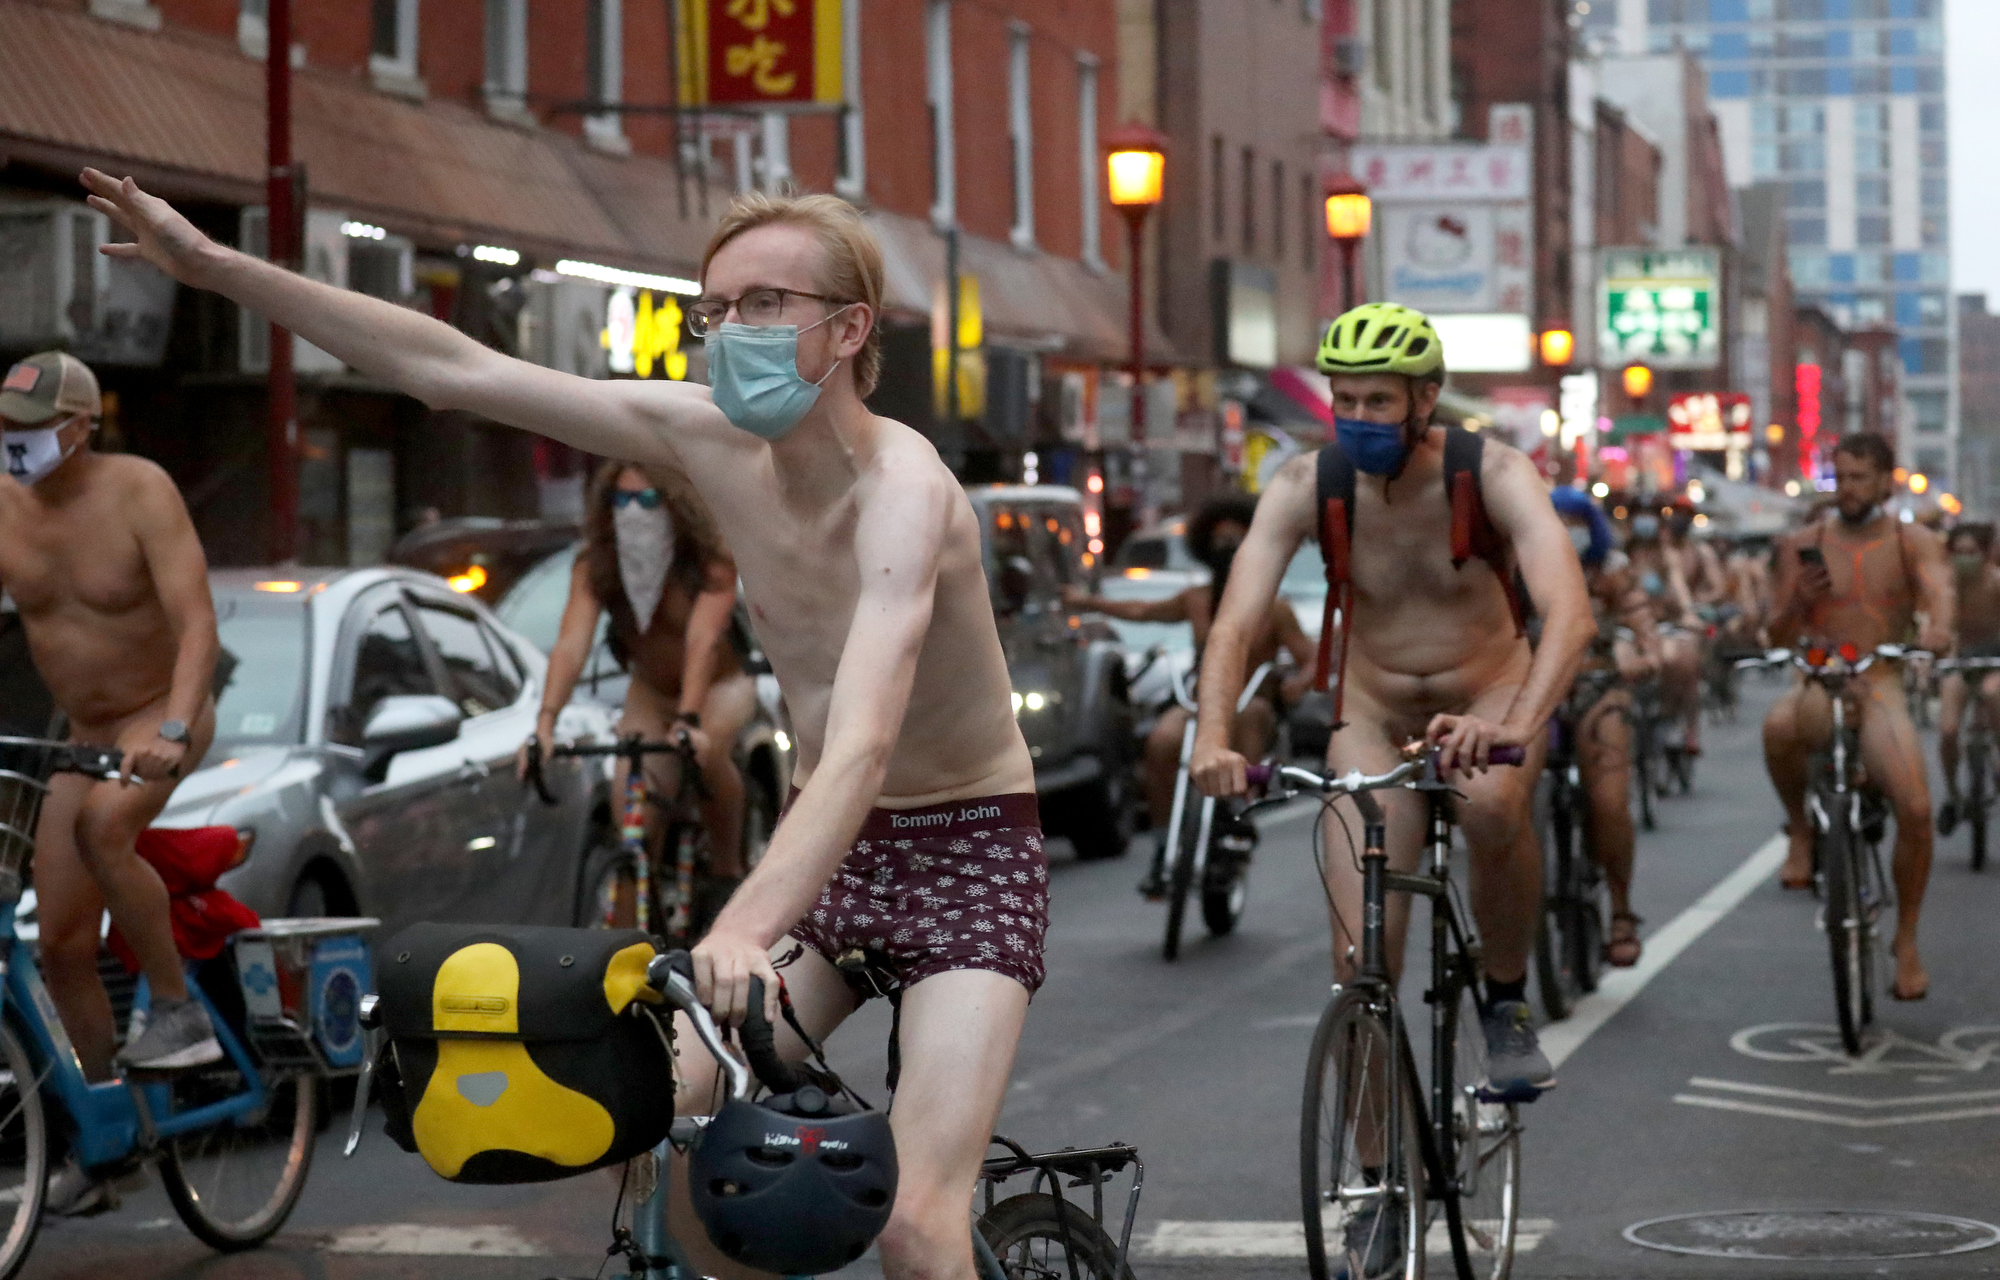 People ride bikes along 10th Street and under the Chinatown Friendship Arch in Philadelphia during the Philly Naked Bike Ride, Saturday, Aug. 28, 2021.